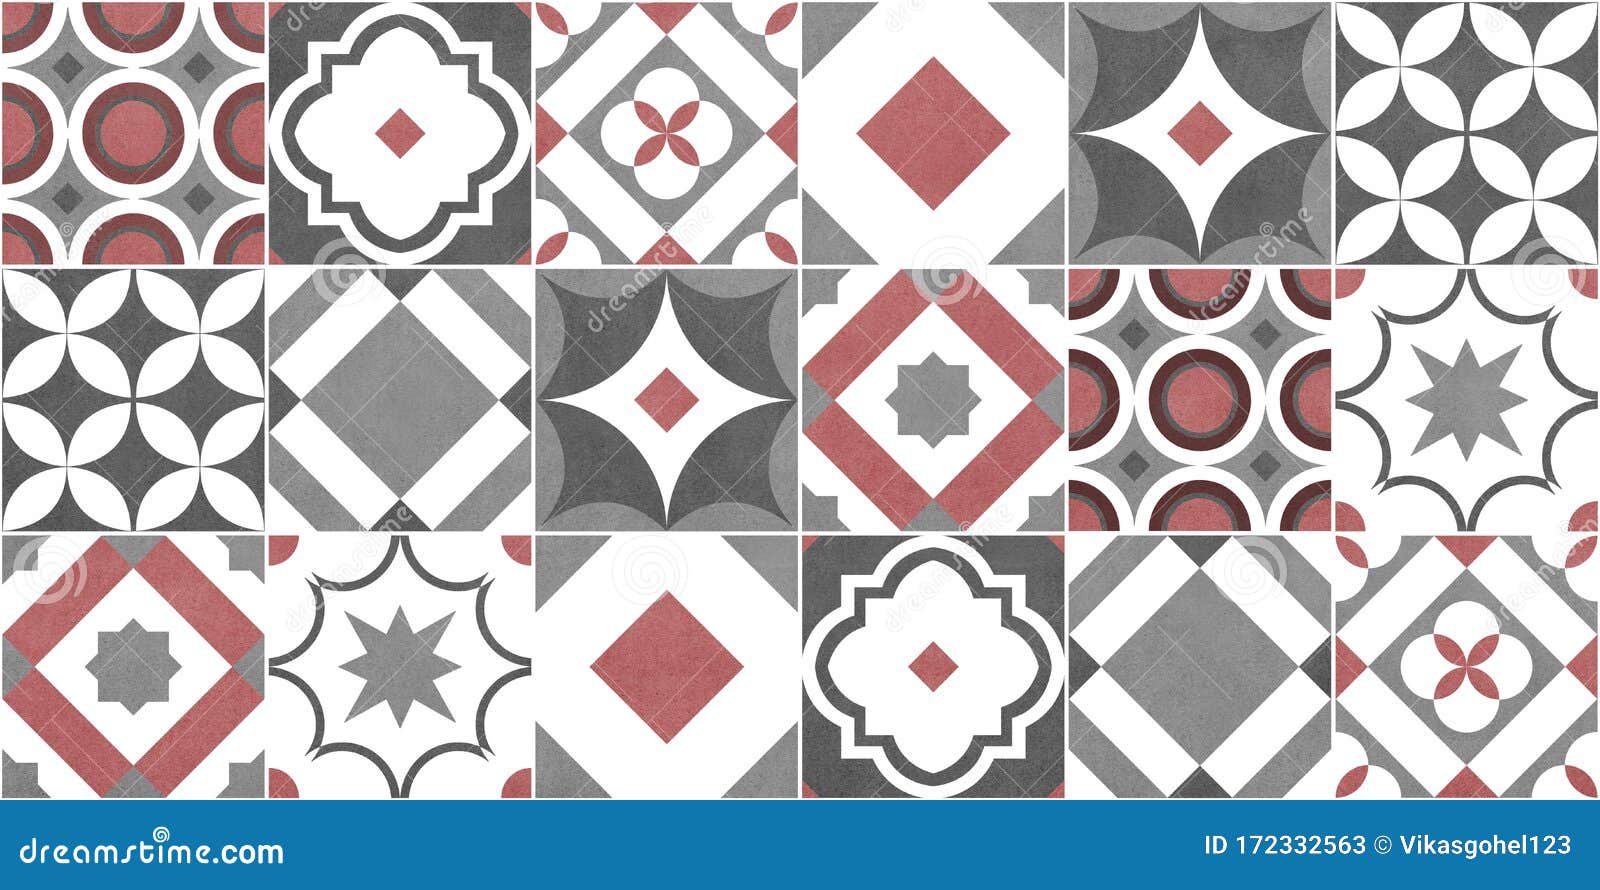 Digital Wall Tiles And Floor Tiles Design For Digital Printing Also You Can Use This Design In Your Multi Color Work Ceramic Wal Stock Illustration Illustration Of Backgrounds Moroccan 172332563